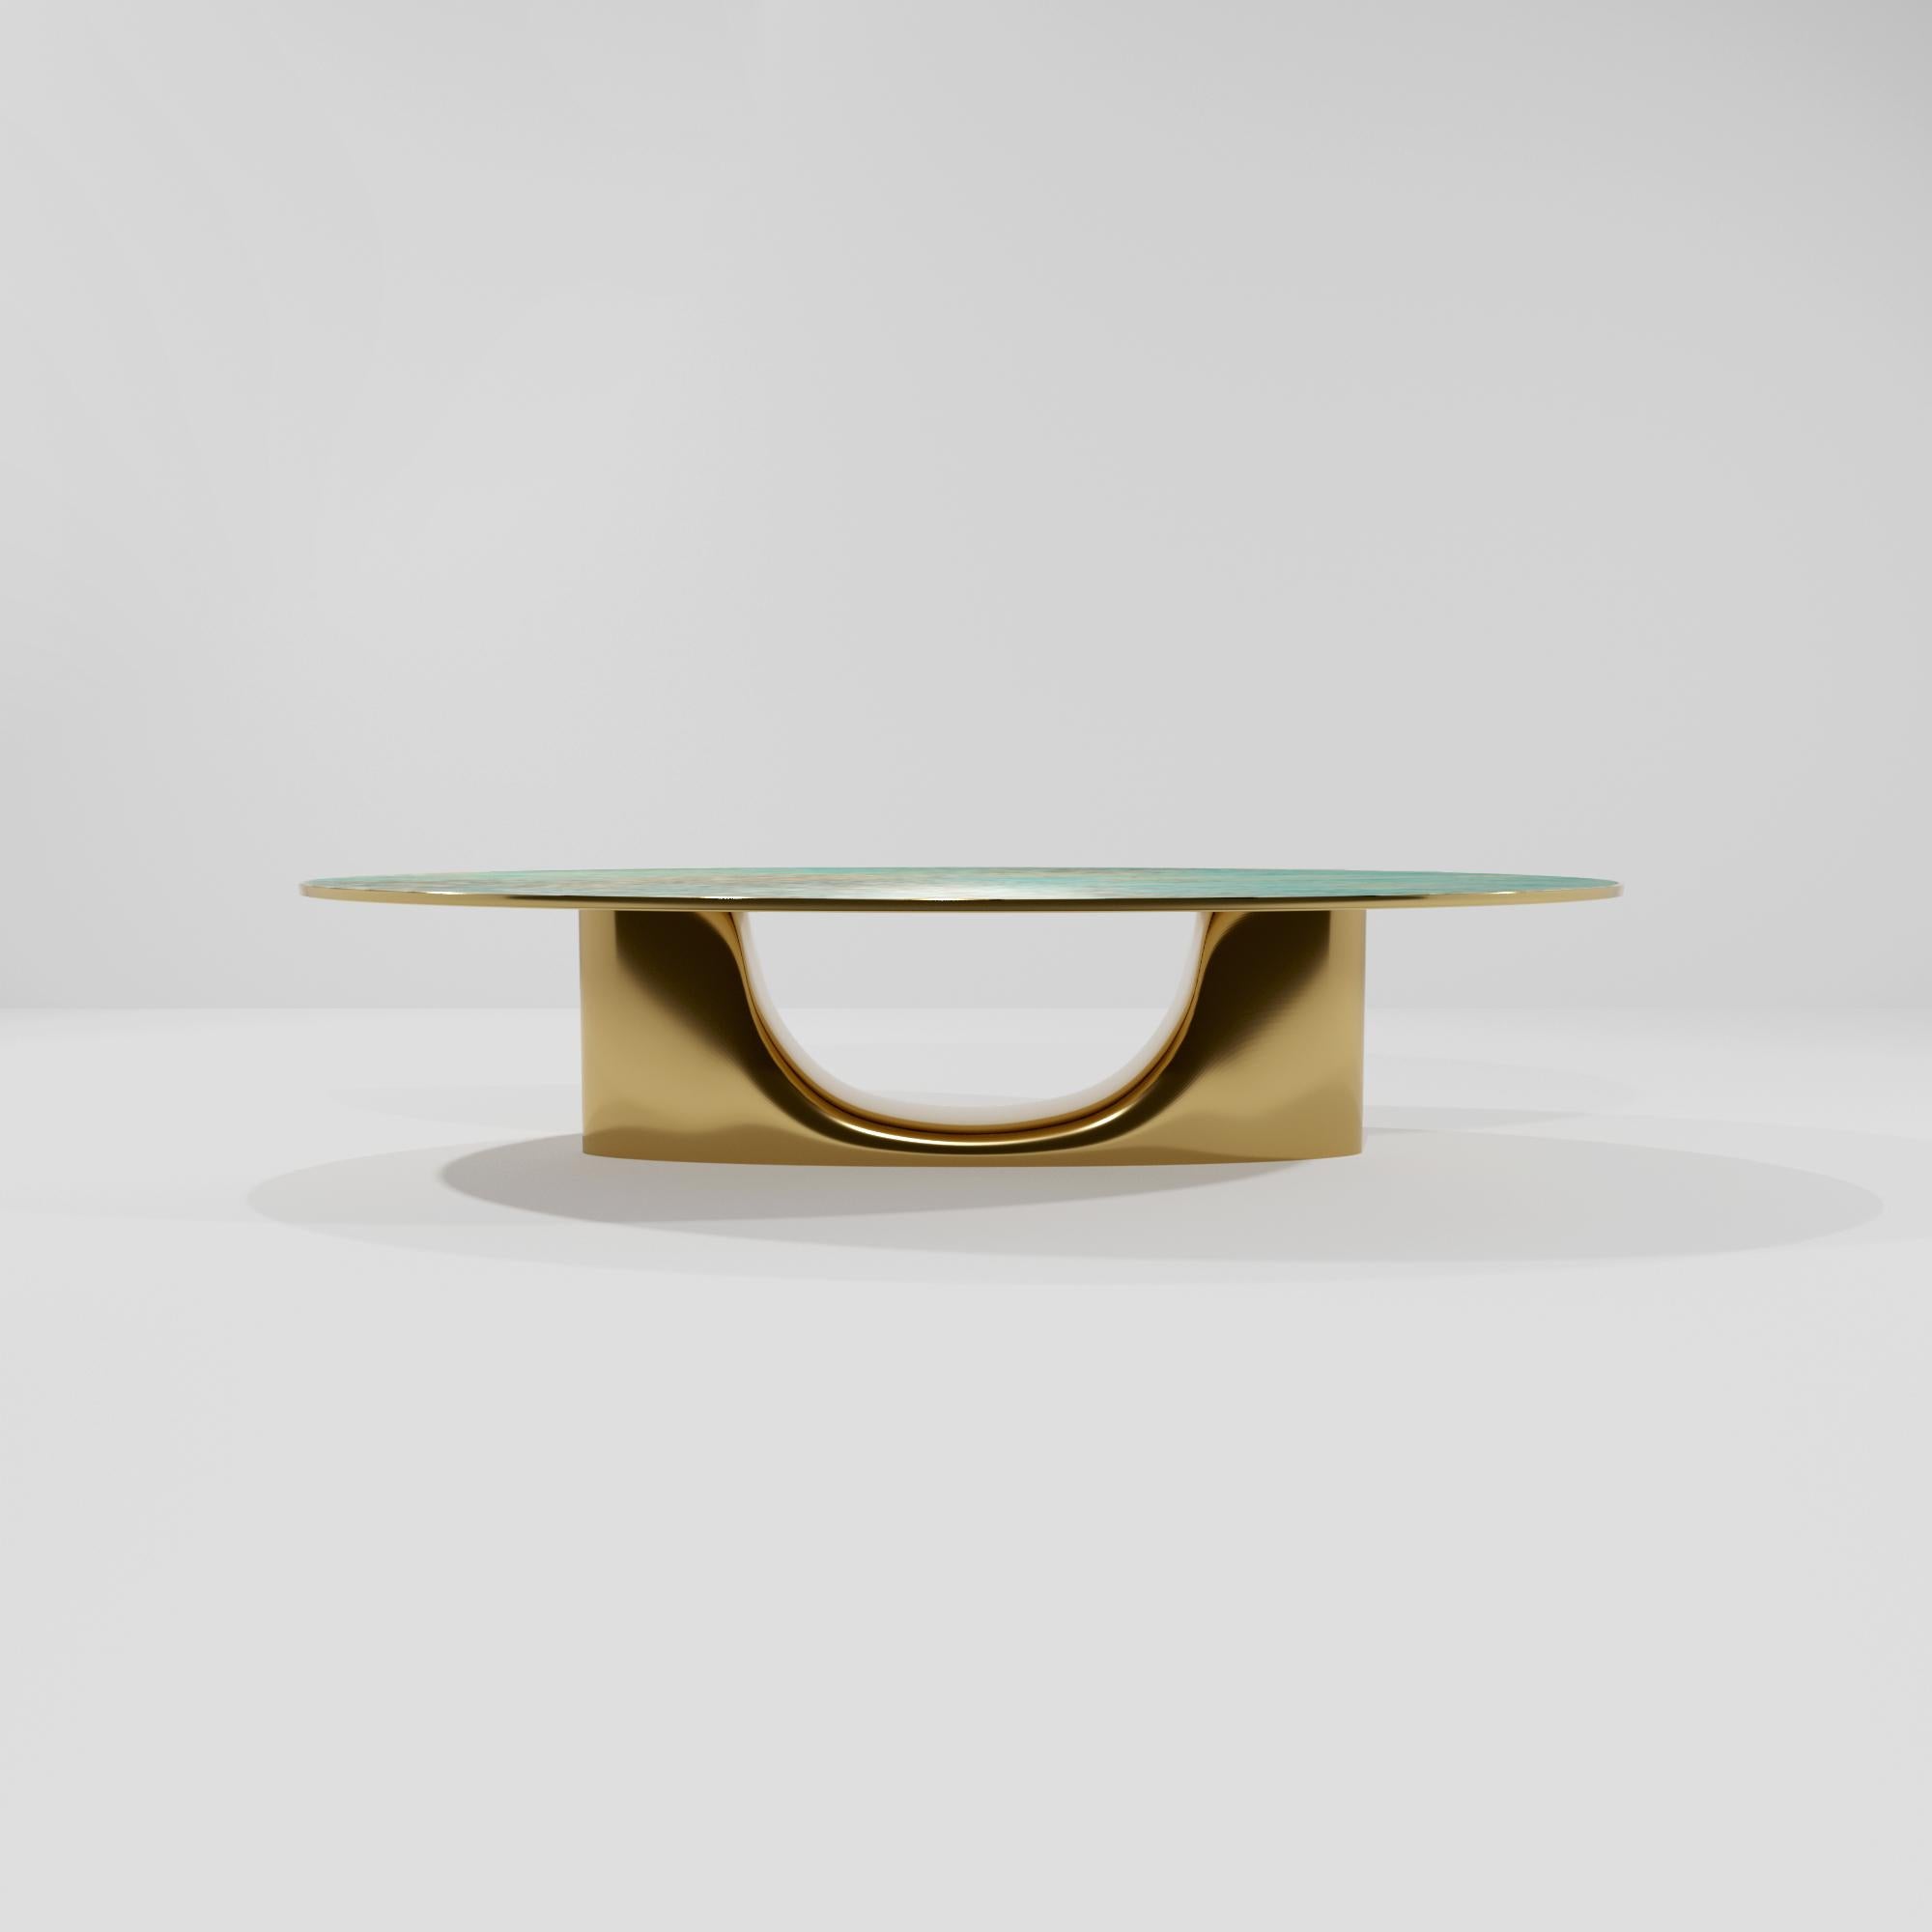 Hand-Carved BIS, 21st Century Blue Green Patina Layered Bronzed Dining Table by Studio SORS